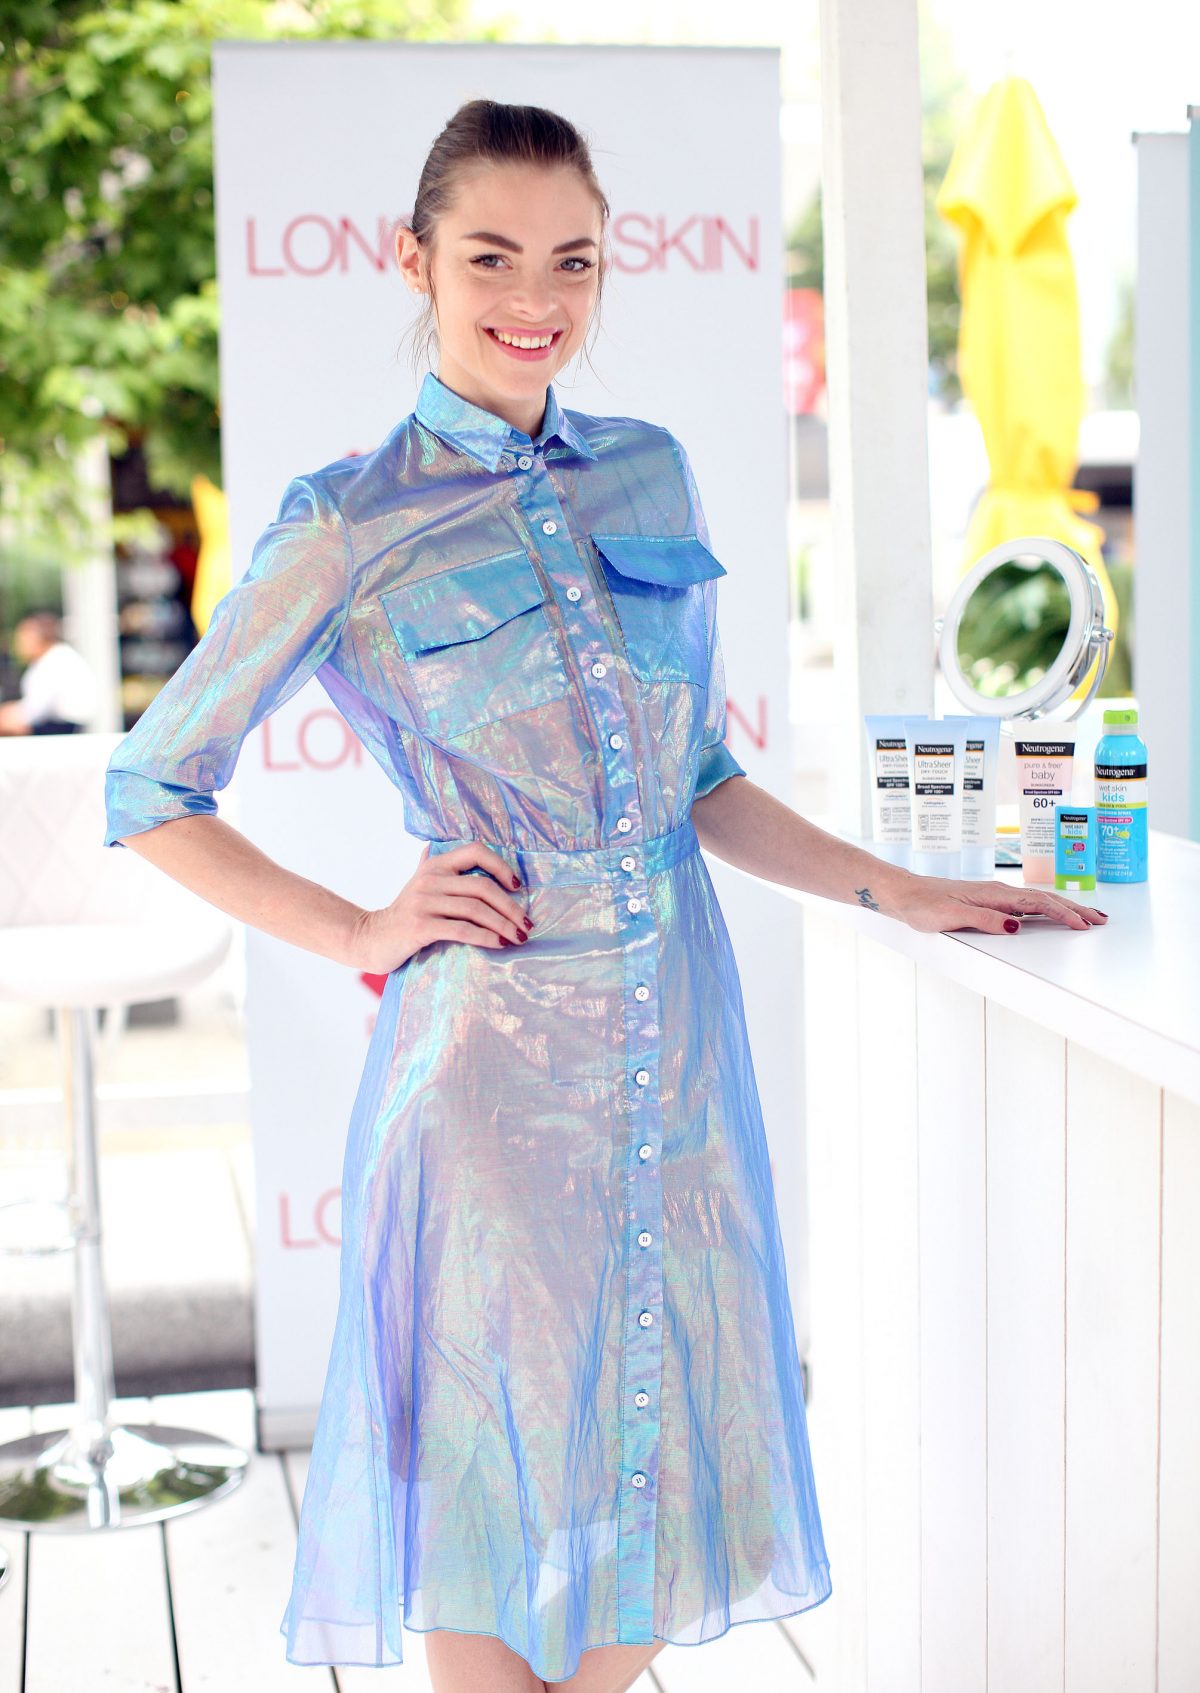 Jaime King Talks Sun Safety At The Long Live Skin Event